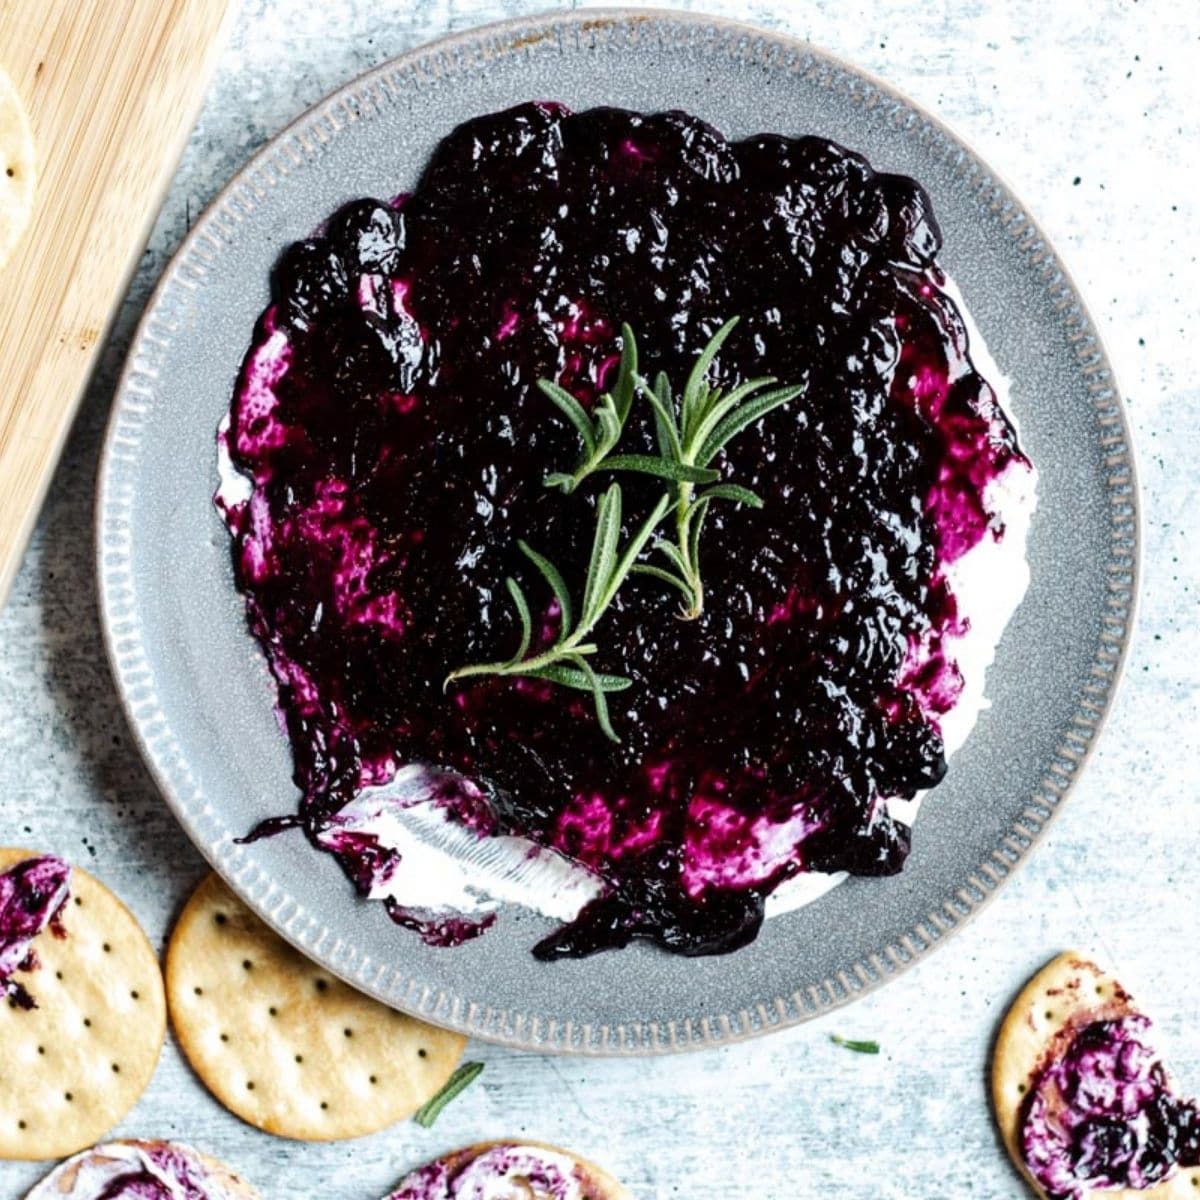 a plate of blueberry goat cheese garnished with rosemary leaves on a concrete table. surrounded by crackers slathered with dip.